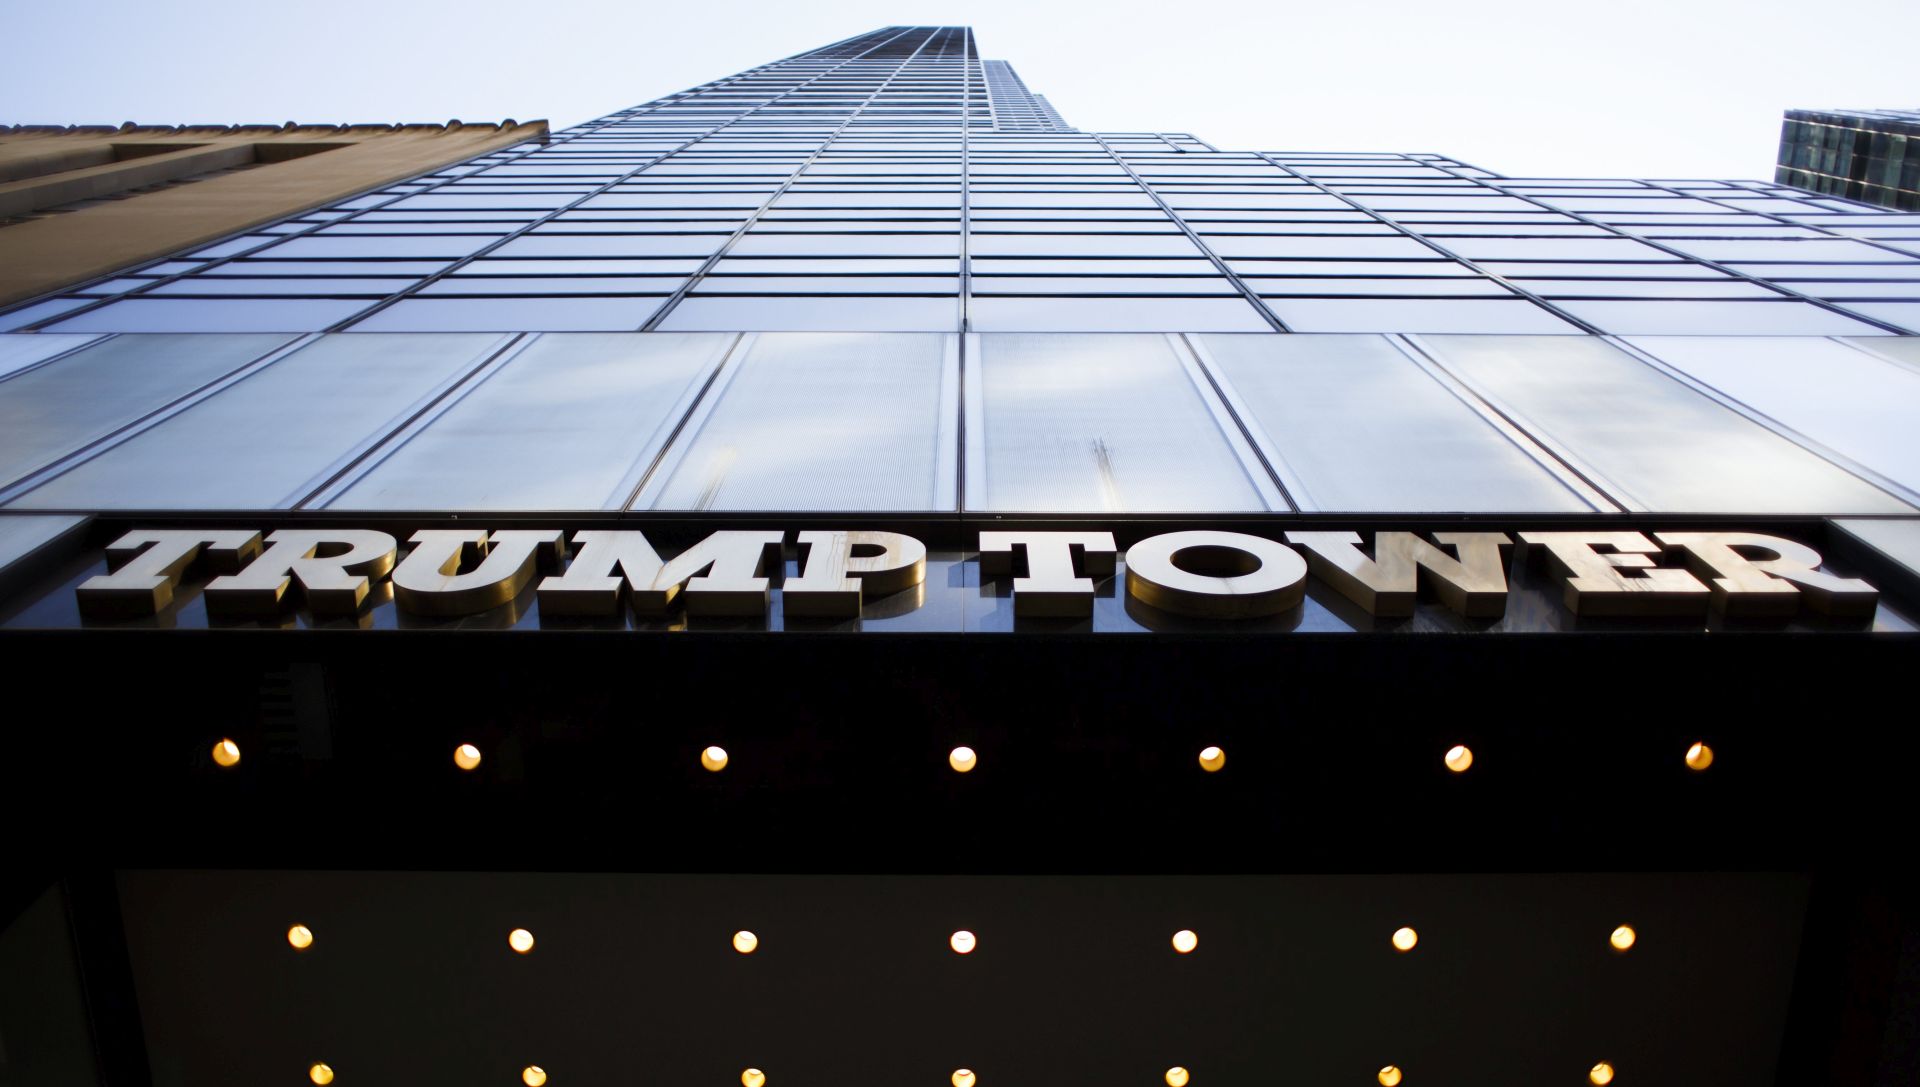 epa05854722 (FILE) - A view of Trump Tower, where US President Donald J. Trump has a home and the main office of his company, in New York, New York, USA, 06 March 2017 (reissued 17 March 2017). According to US media reports citing officials on 17 March 2017, a laptop belonging to a US Secret Service agent has been stolen from a car. The computer is said to contain floor plans of Trump Tower in New York among other information.  EPA/JUSTIN LANE